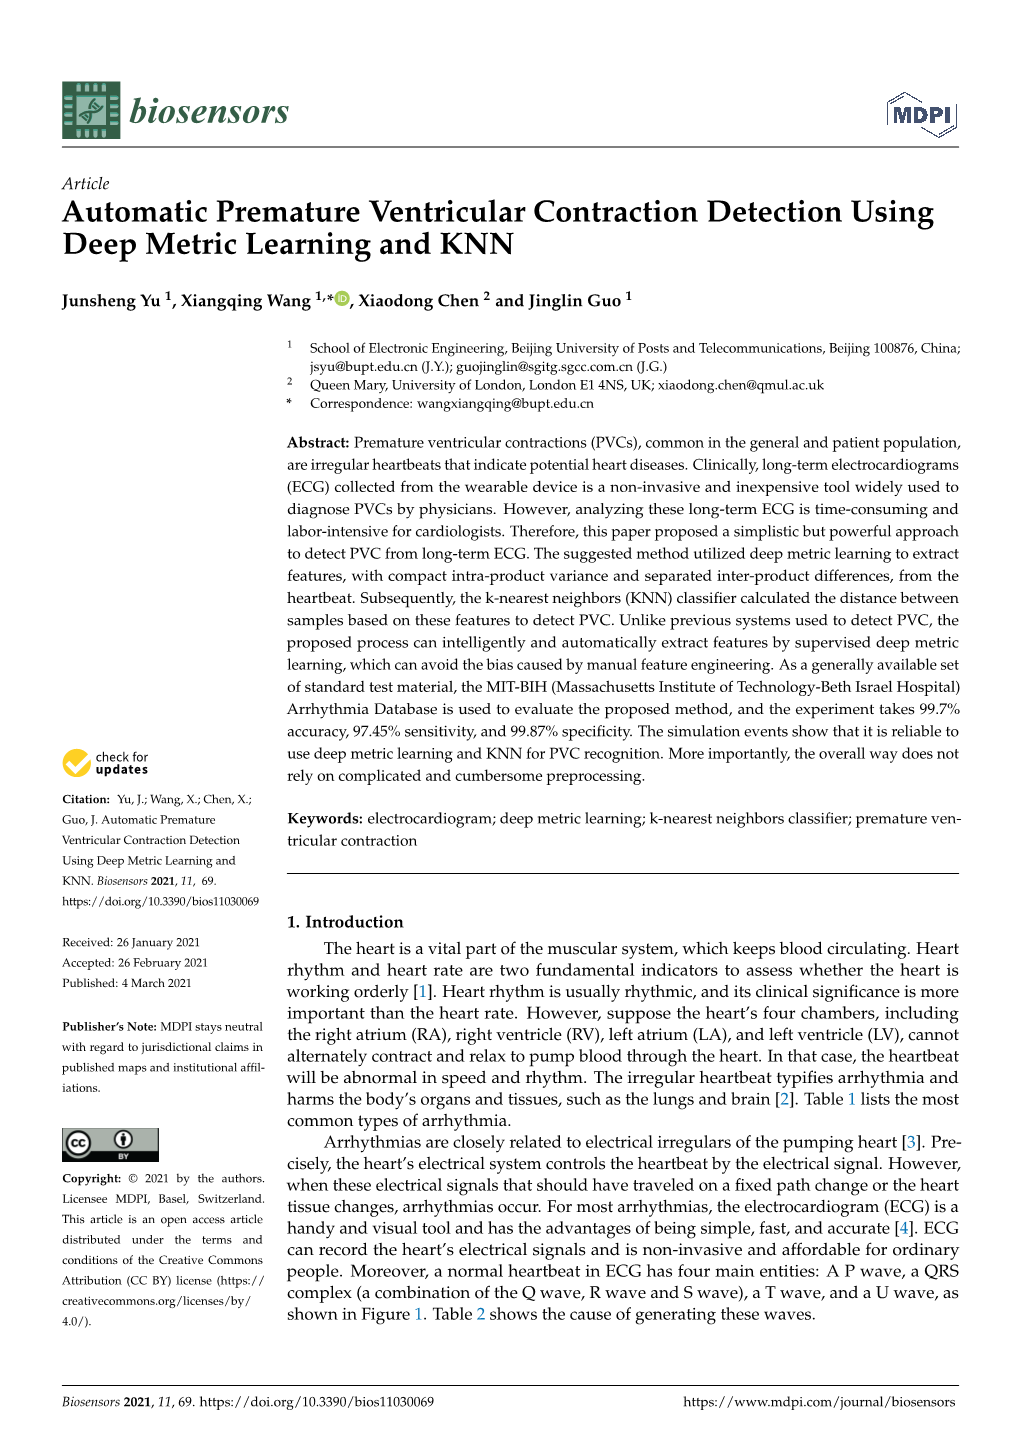 Automatic Premature Ventricular Contraction Detection Using Deep Metric Learning and KNN